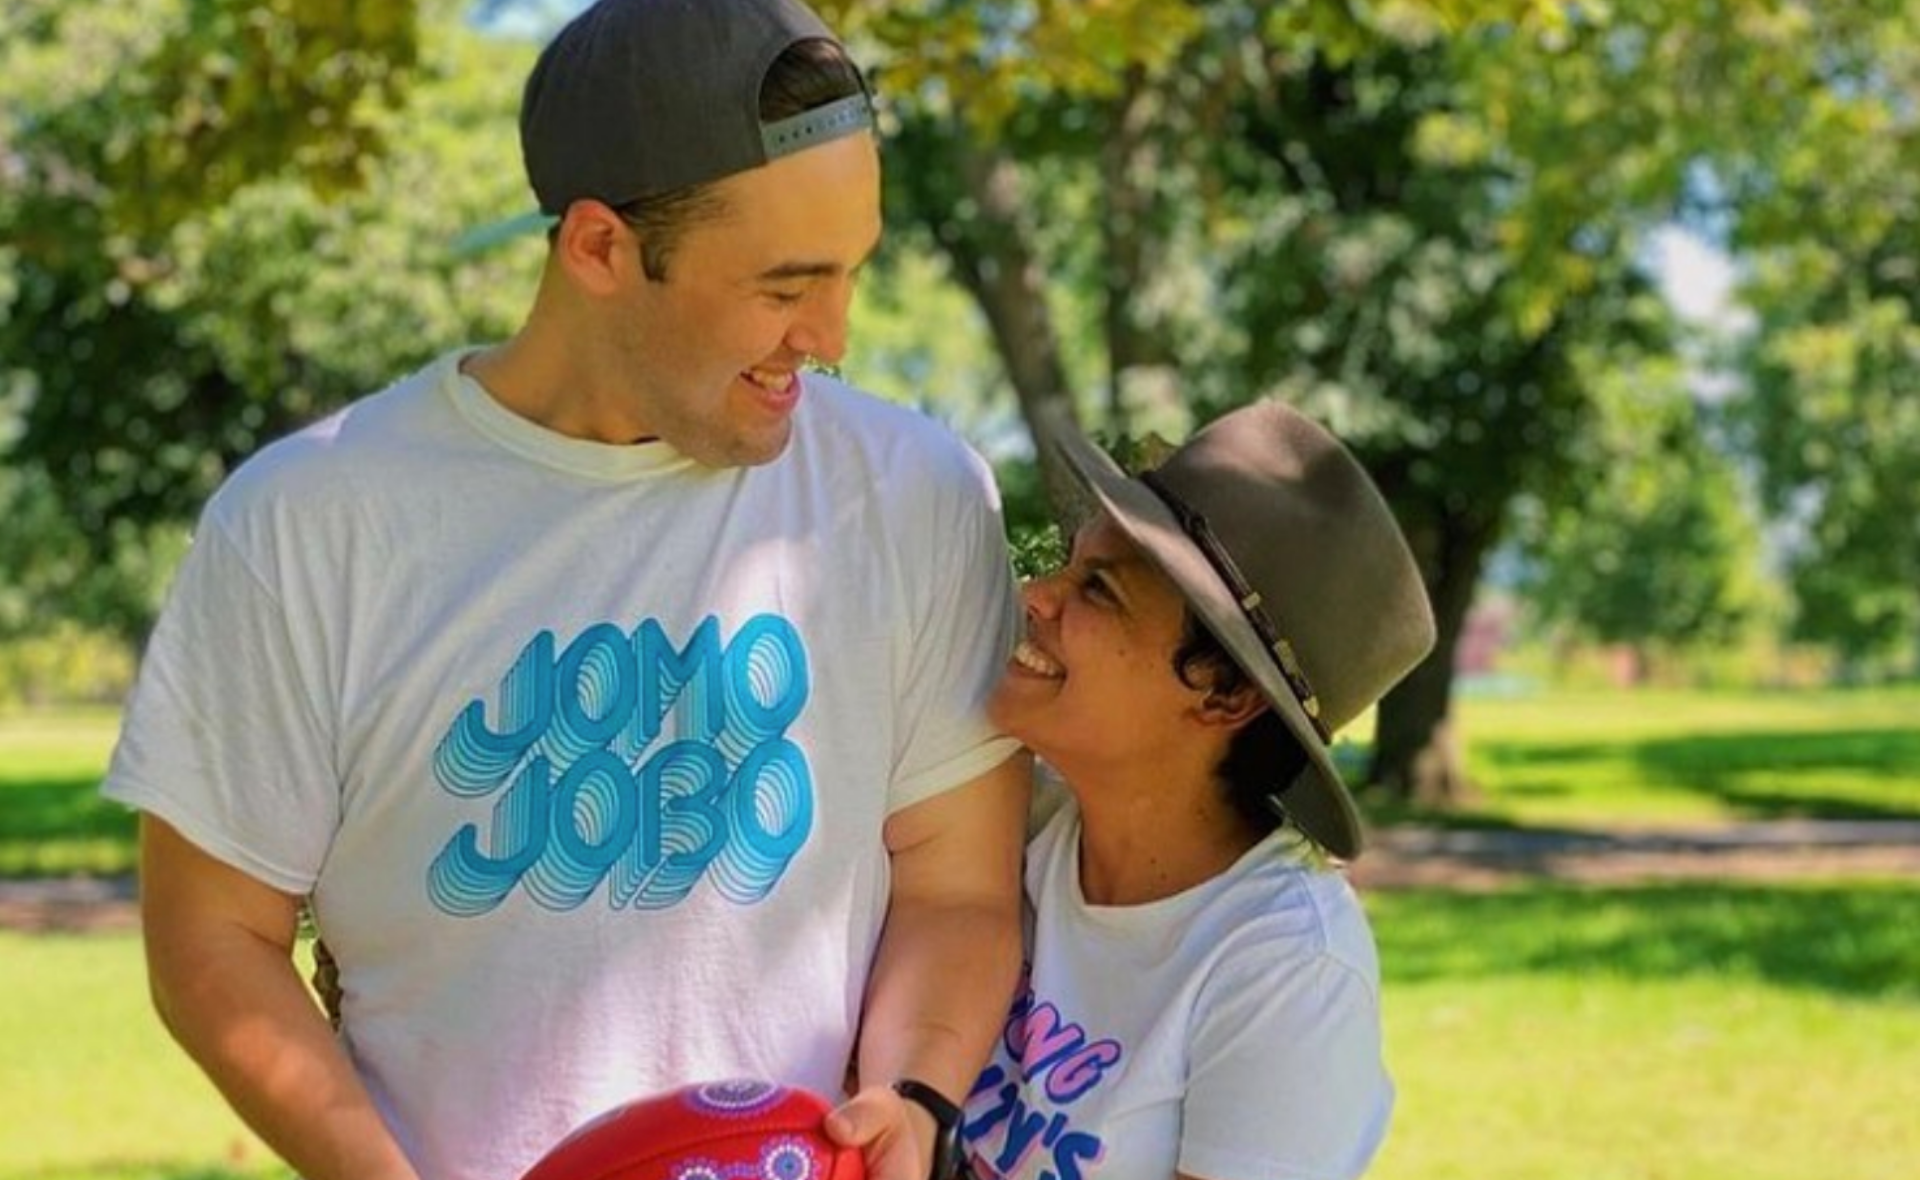 Miranda Tapsell just announced she’s pregnant with husband James Colley in the sweetest way